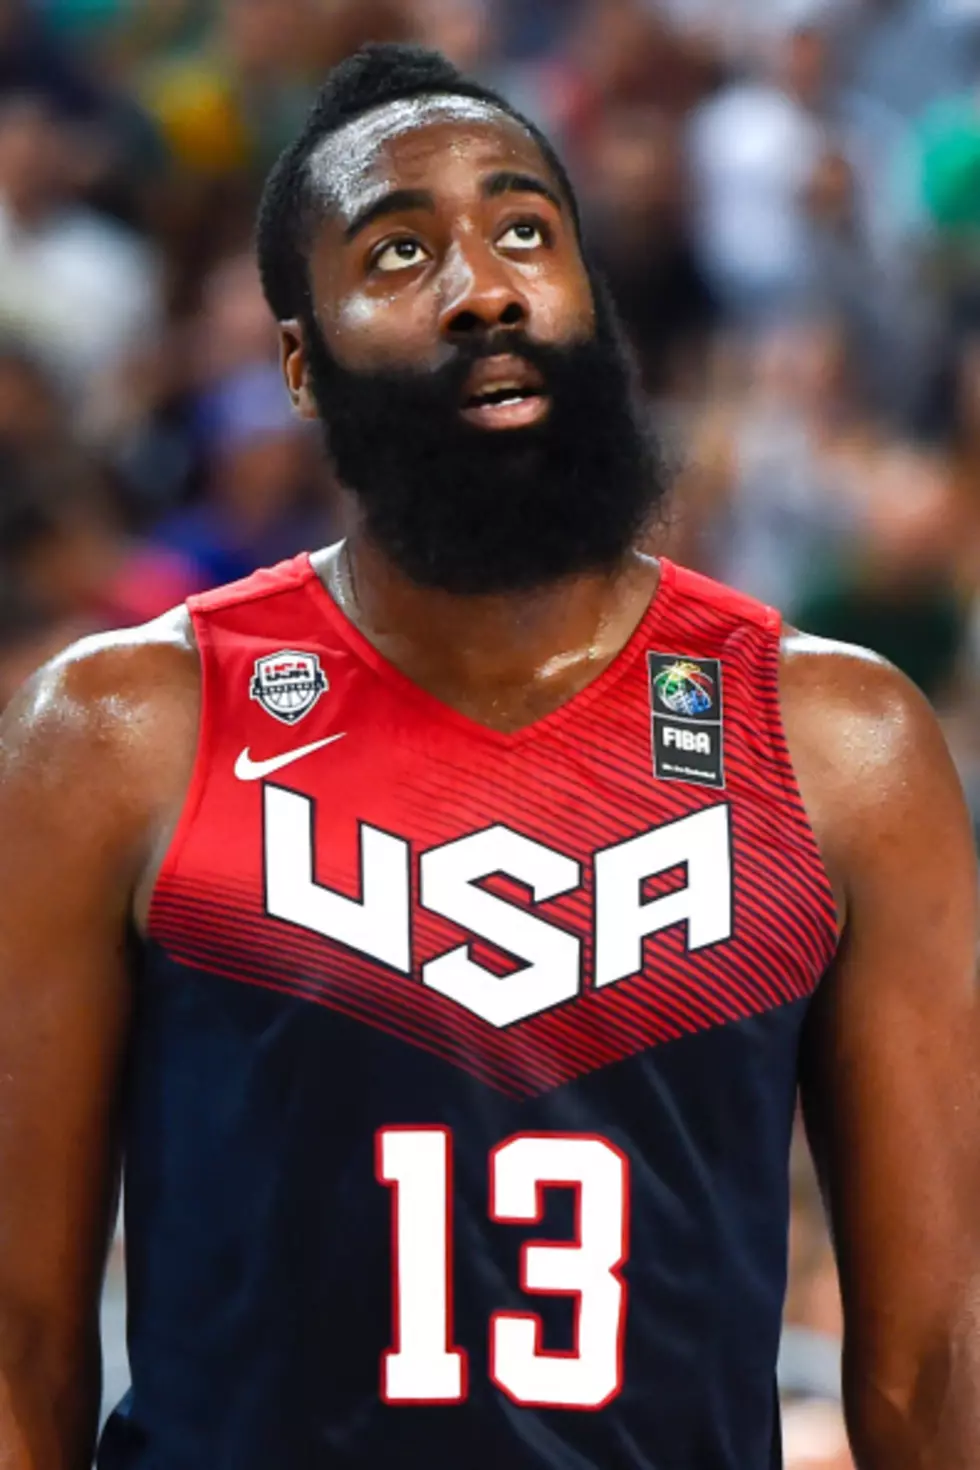 James Harden Crashing His Motorized &#8216;Segway&#8217; While in Barcelona For the FIBA World Cup &#8211; VIDEO